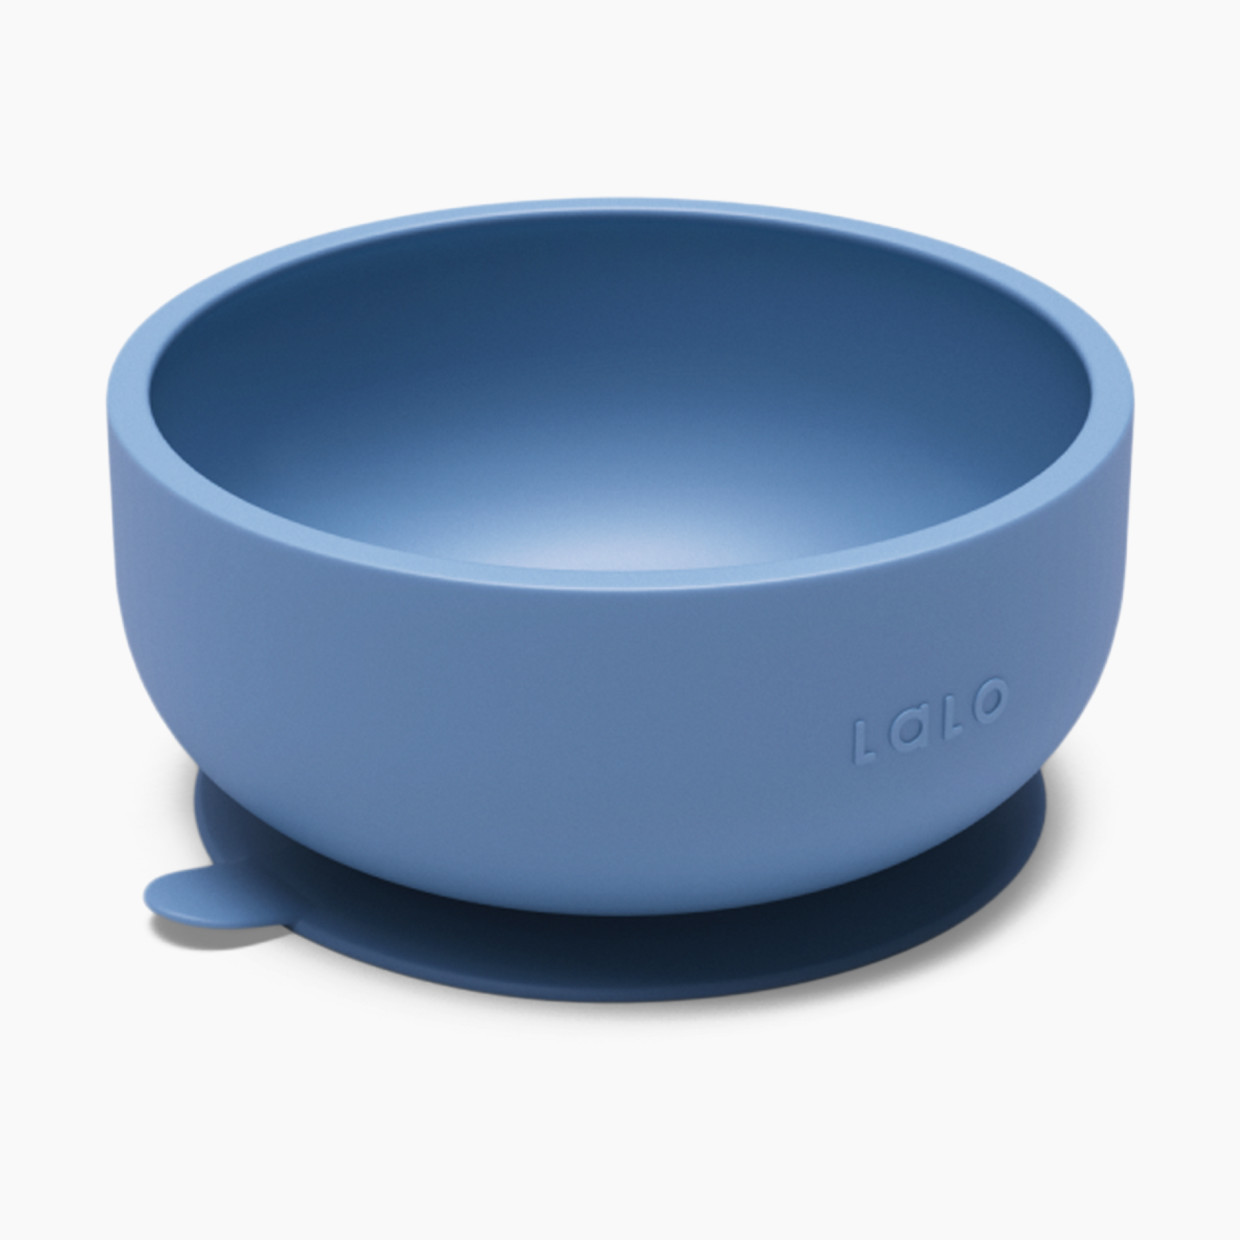 Lalo Suction Bowl - Blueberry, 1.